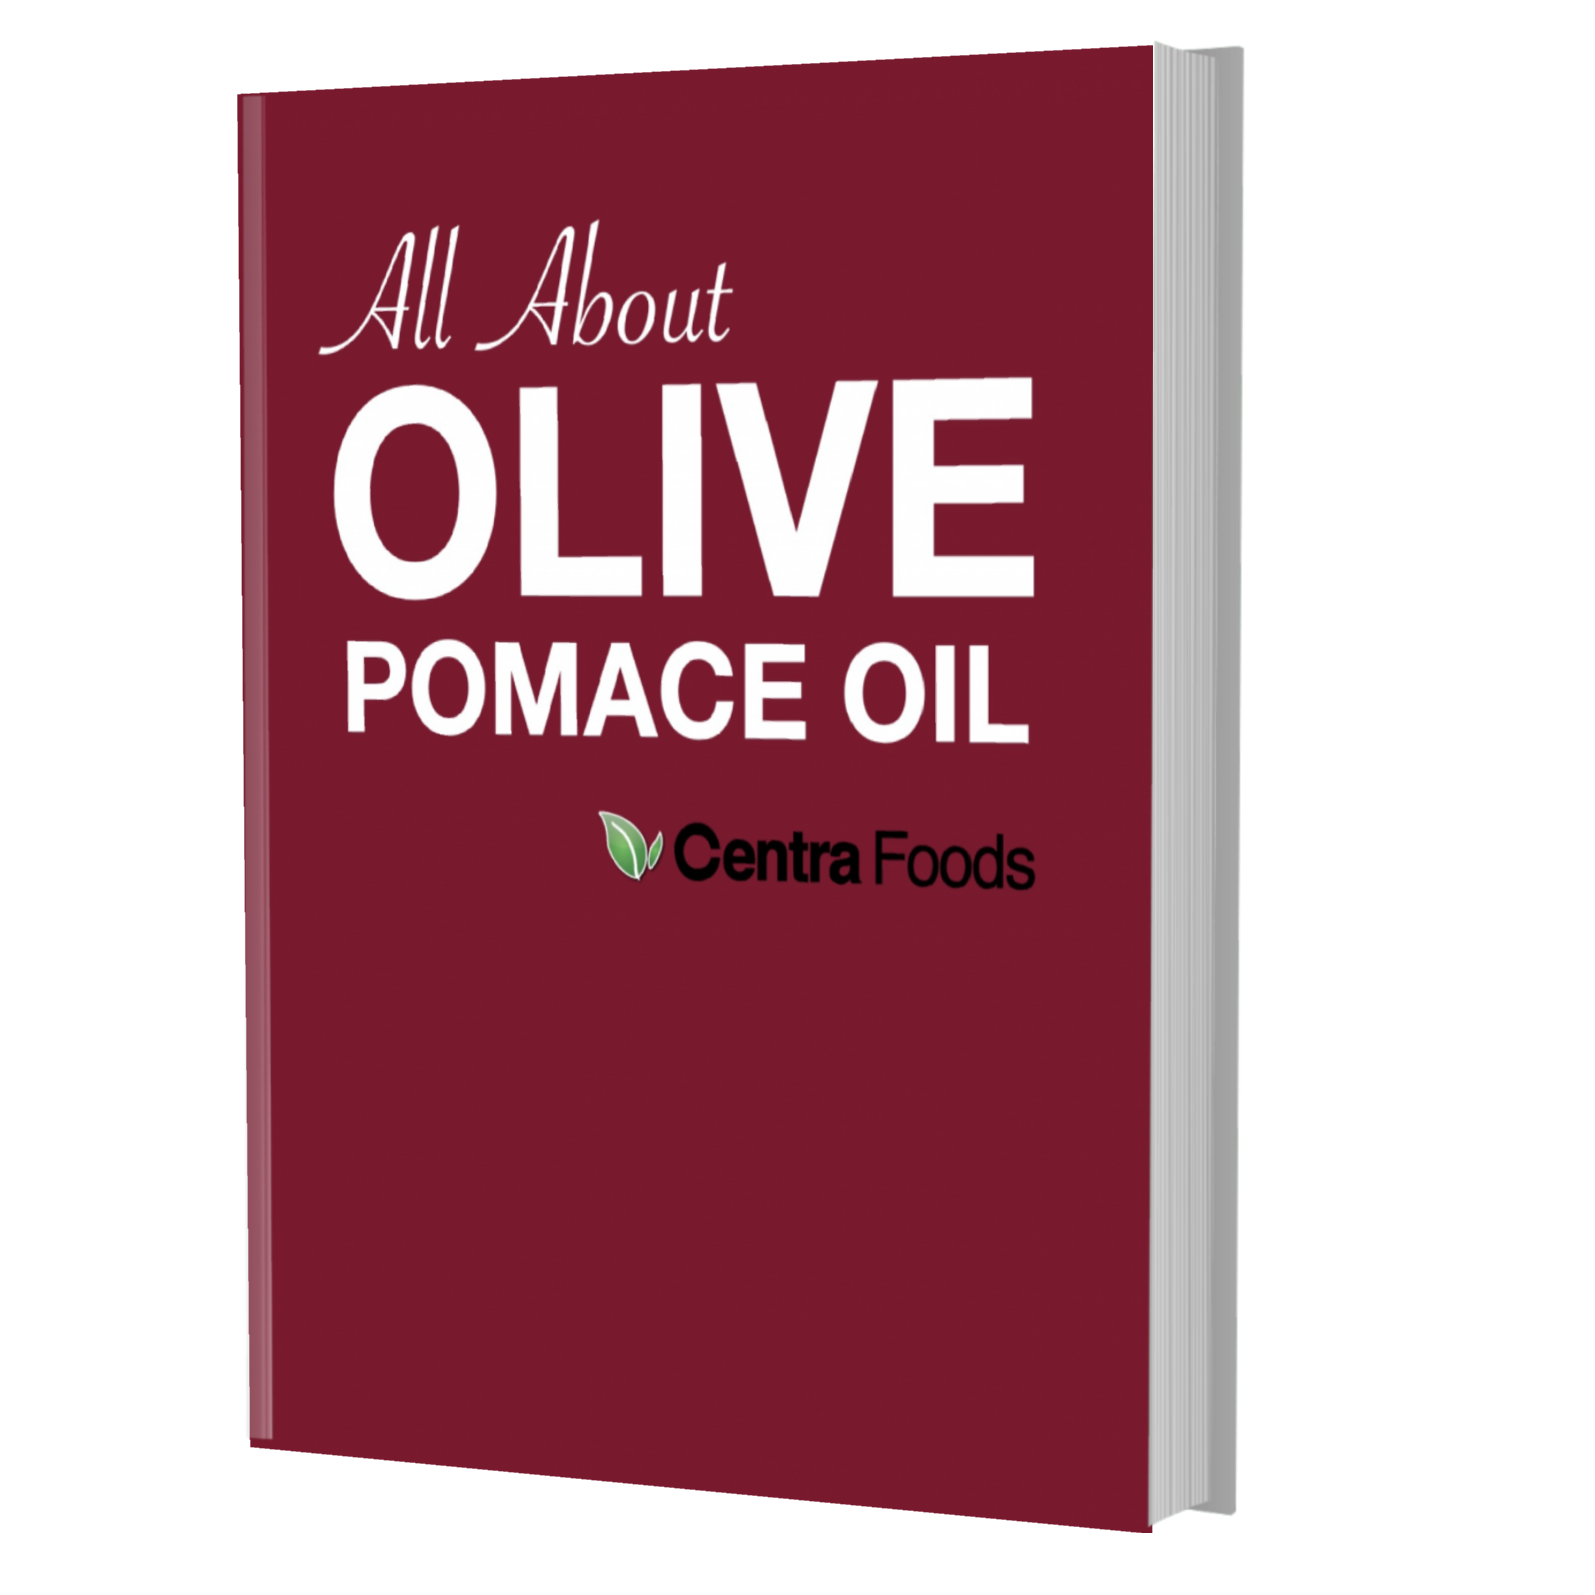 All About Olive Pomace Oil eBook